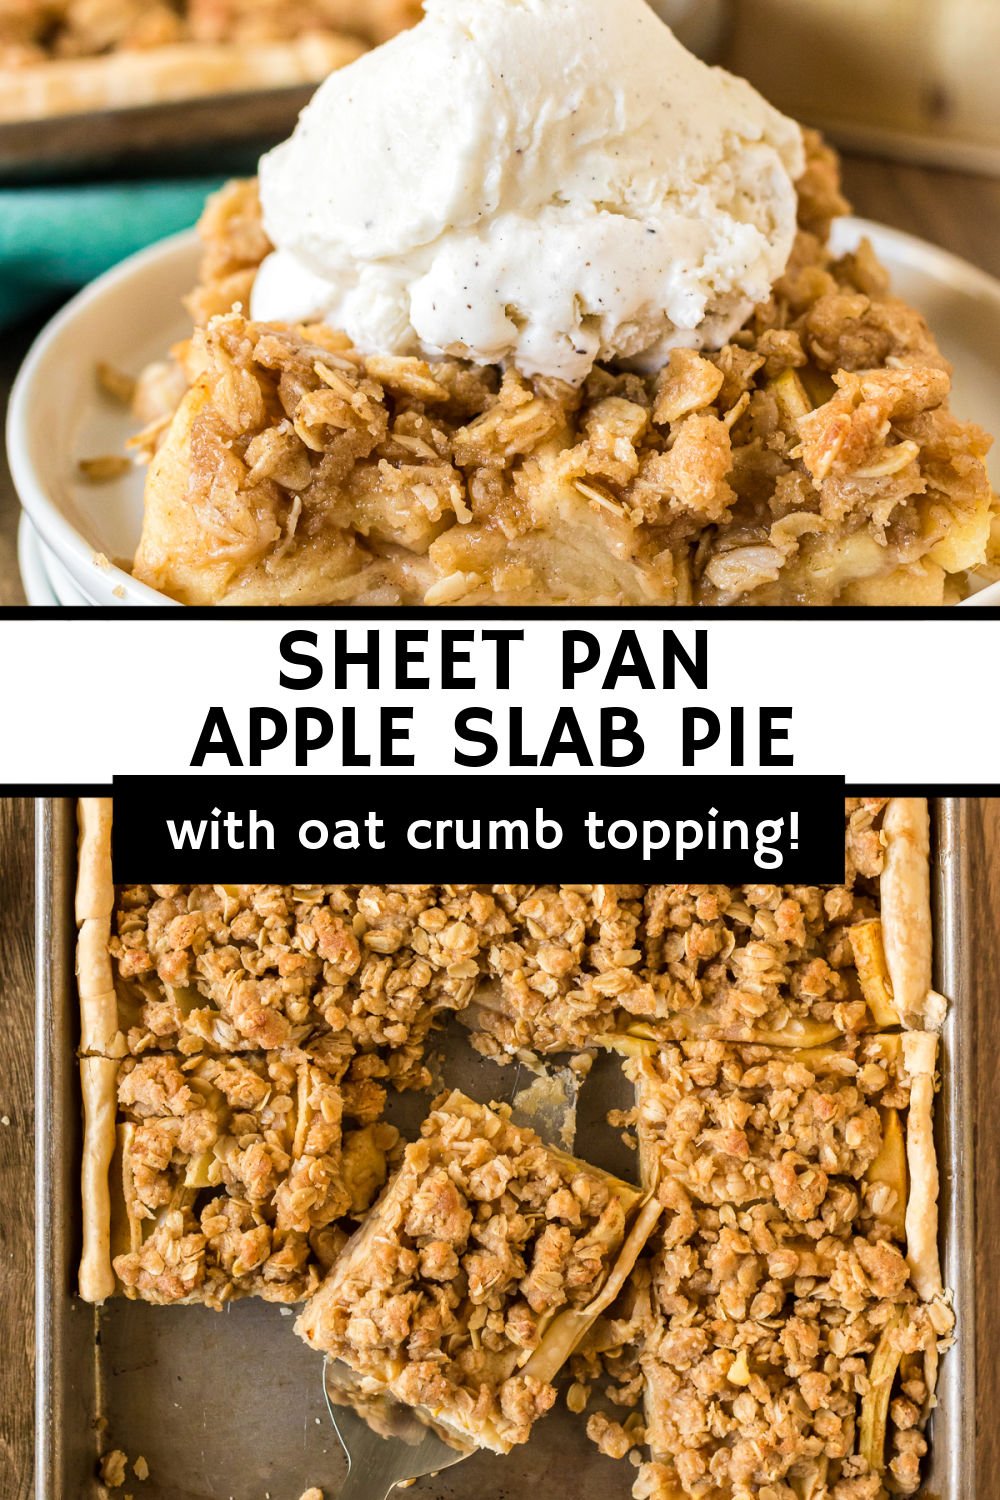 Apple season is in full swing, and what better way to celebrate than with a delicious apple slab pie? Gooey cinnamon and brown sugar apples baked on top of a buttery pie crust and finished off with a delightful oat crumble - make this easy sheet pan apple pie a fall staple! | www.persnicketyplates.com